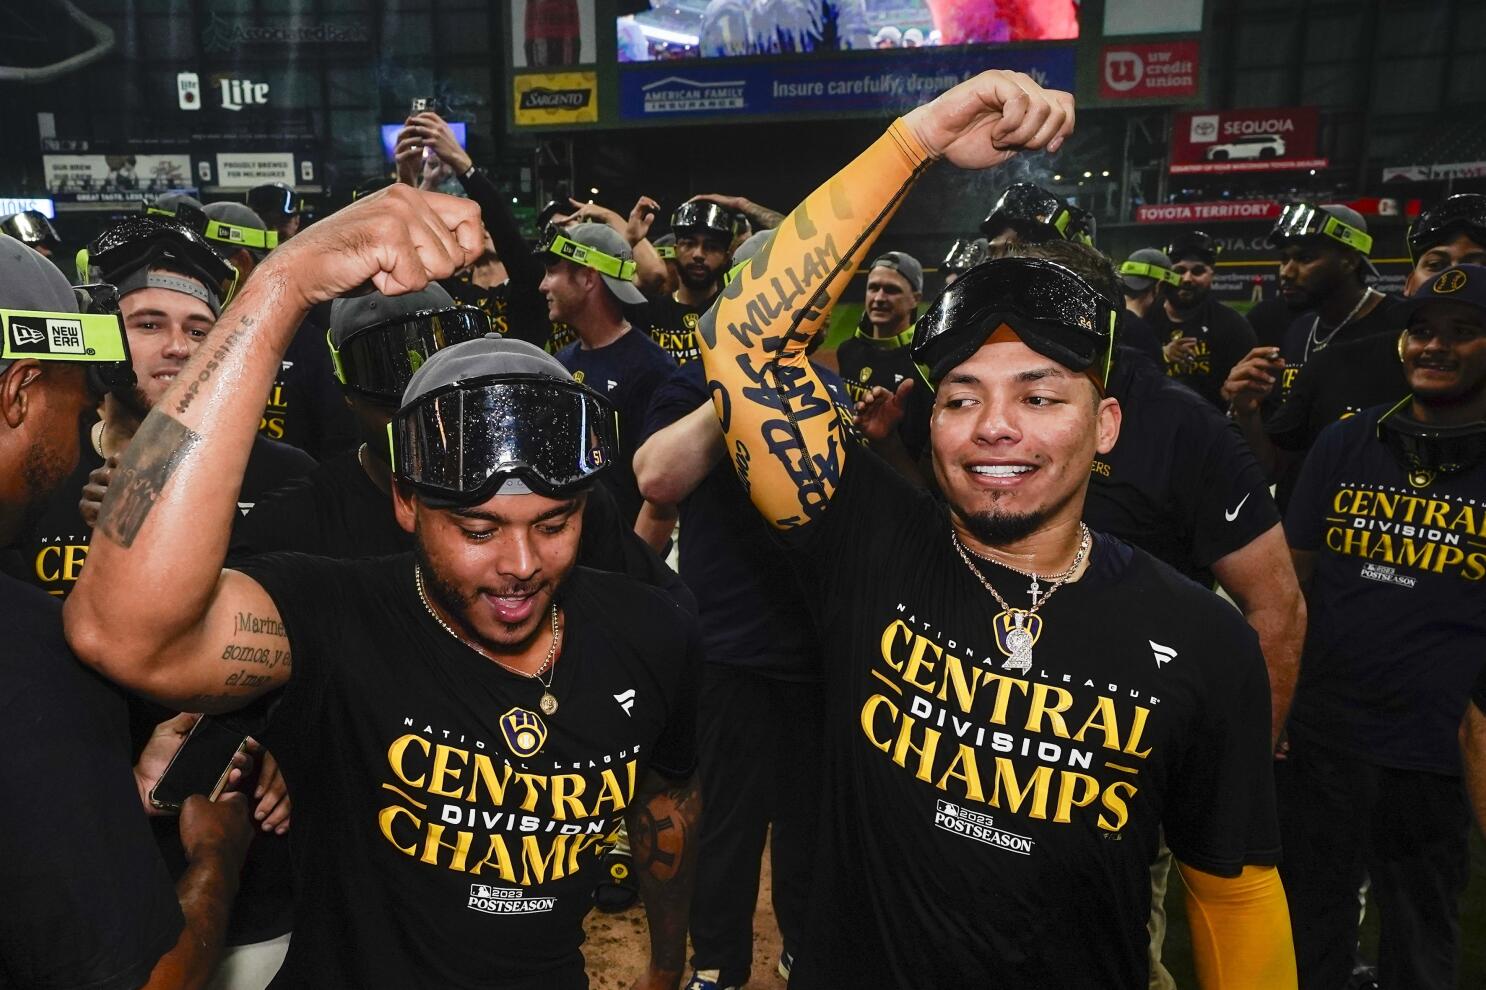 Brewers Williams breaks hand in division clinching celebration